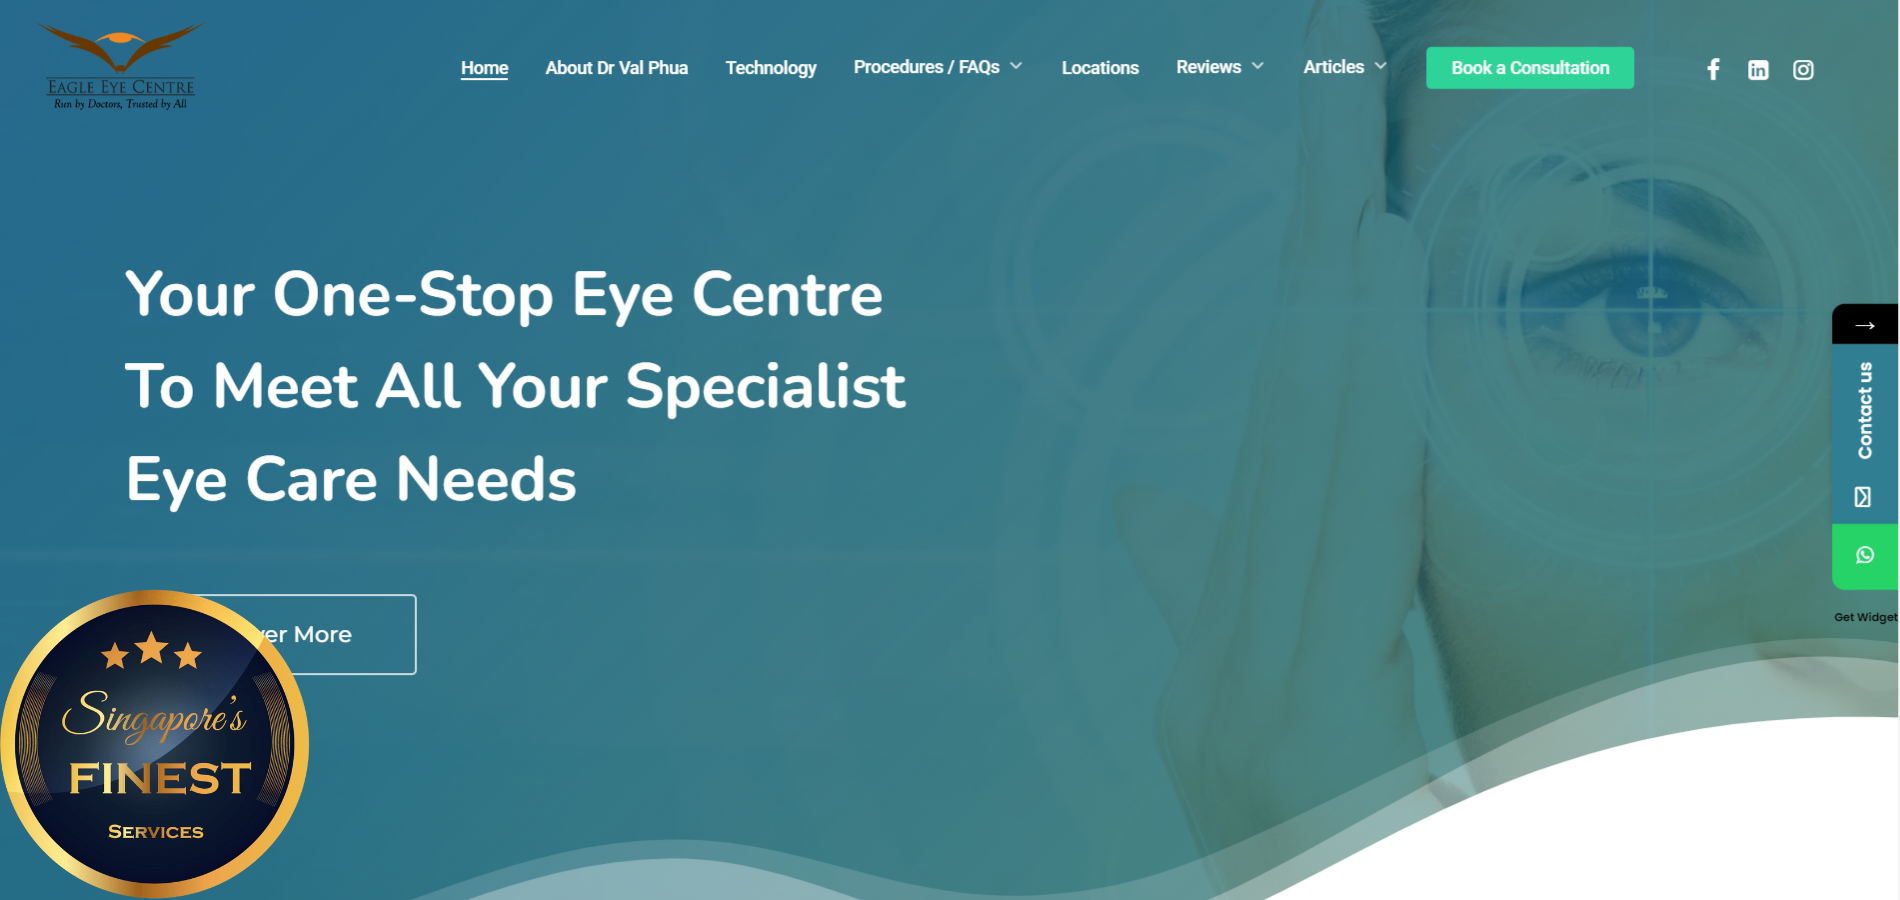 The 10 Finest LASIK Clinics in Singapore